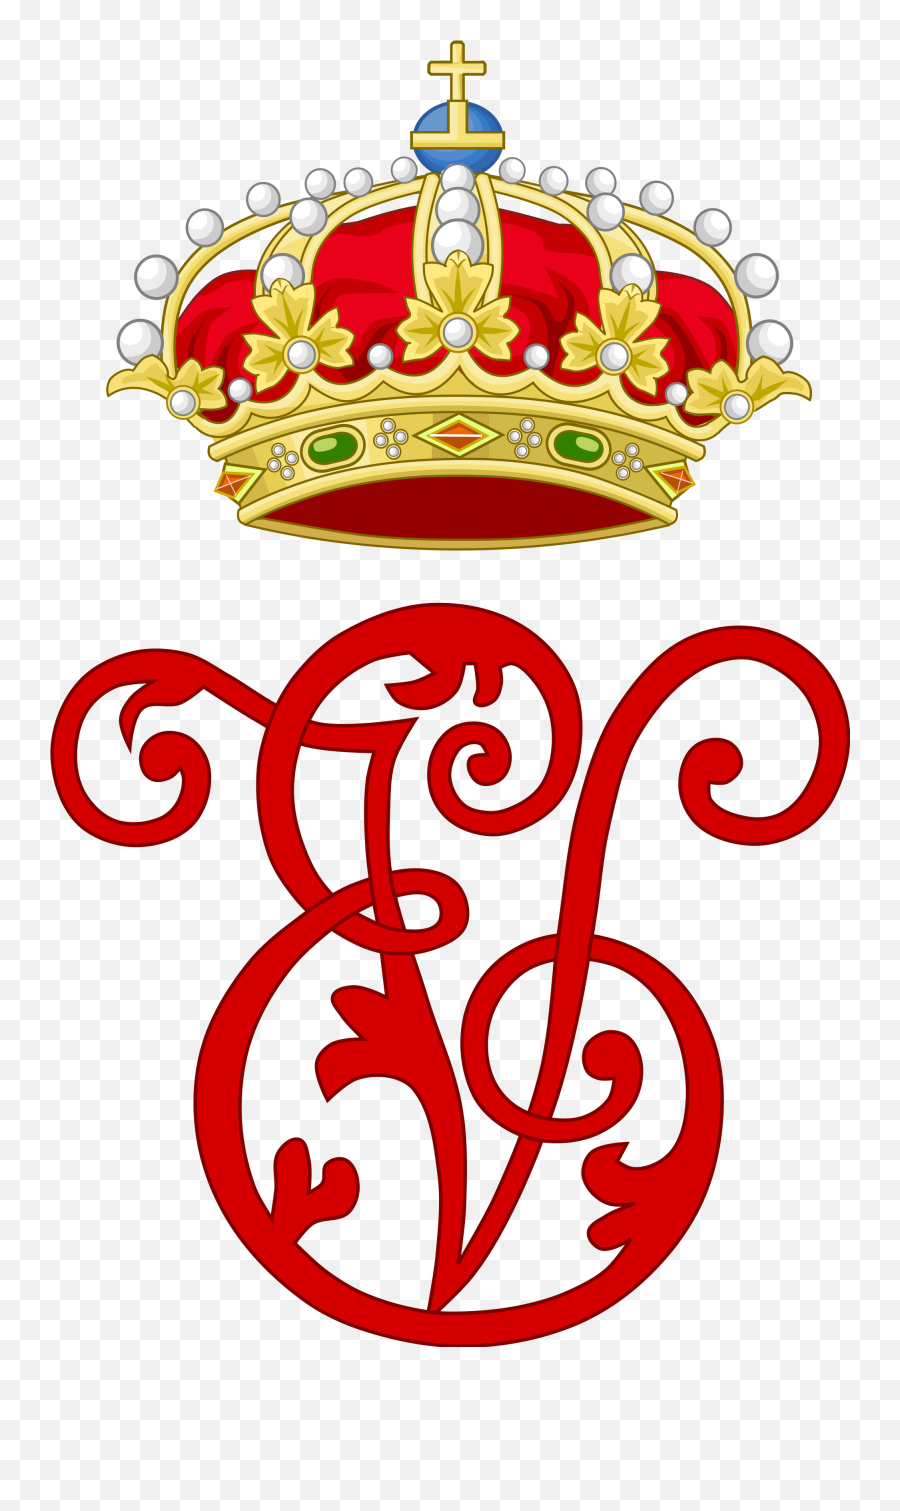 Queen Victoria Eugenie Of Spain - Queen Monogram Emoji,Queen Card With Two Emotions Tattoo